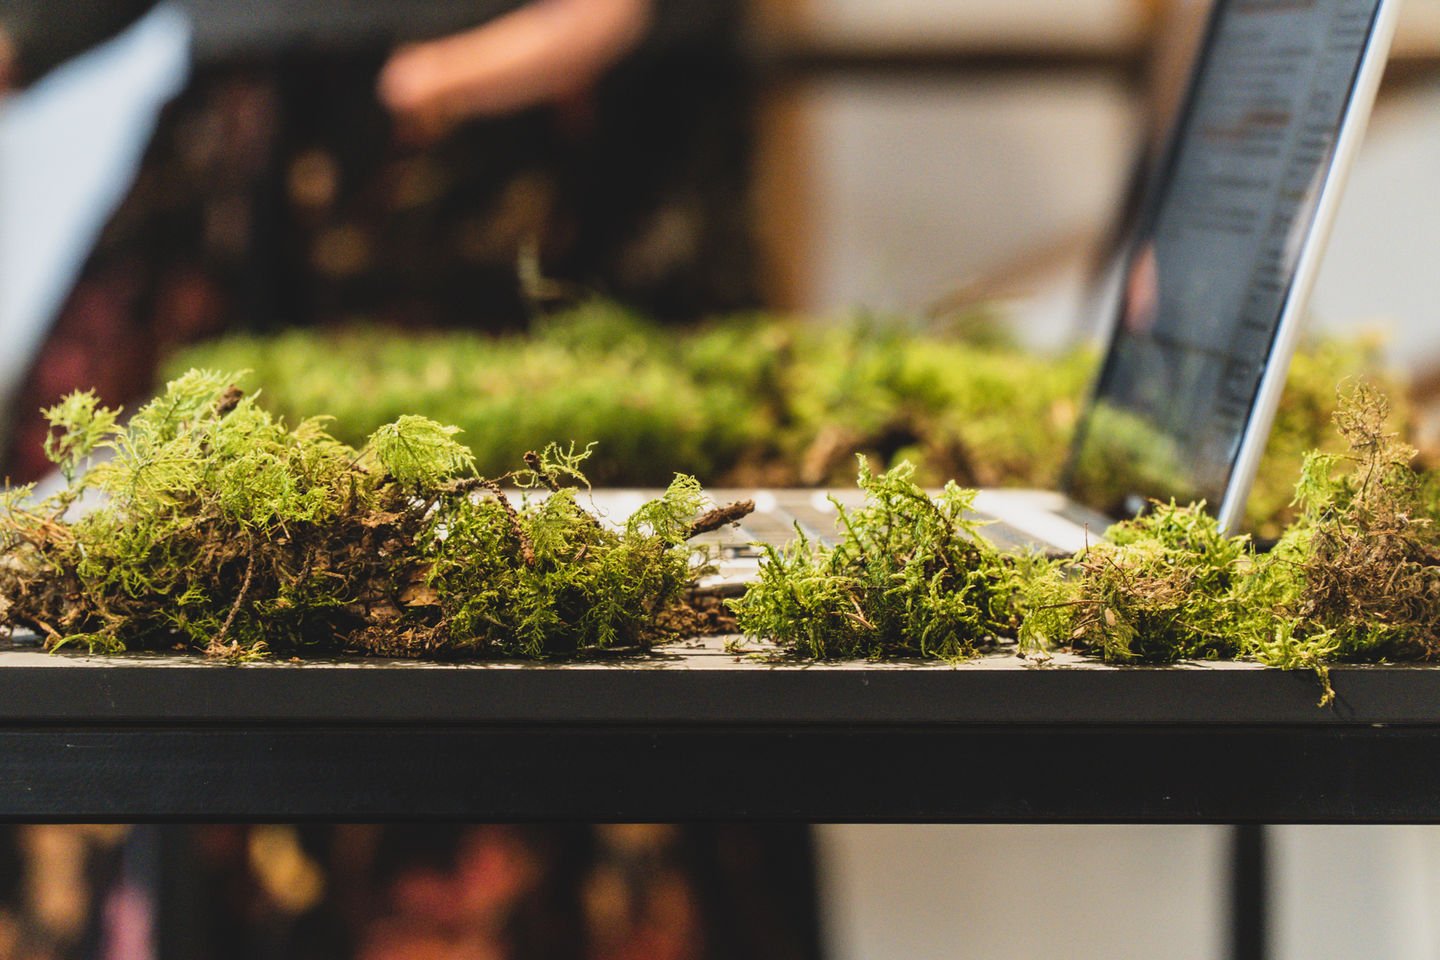 Green moss is placed around a macbook as part of an exhibition display